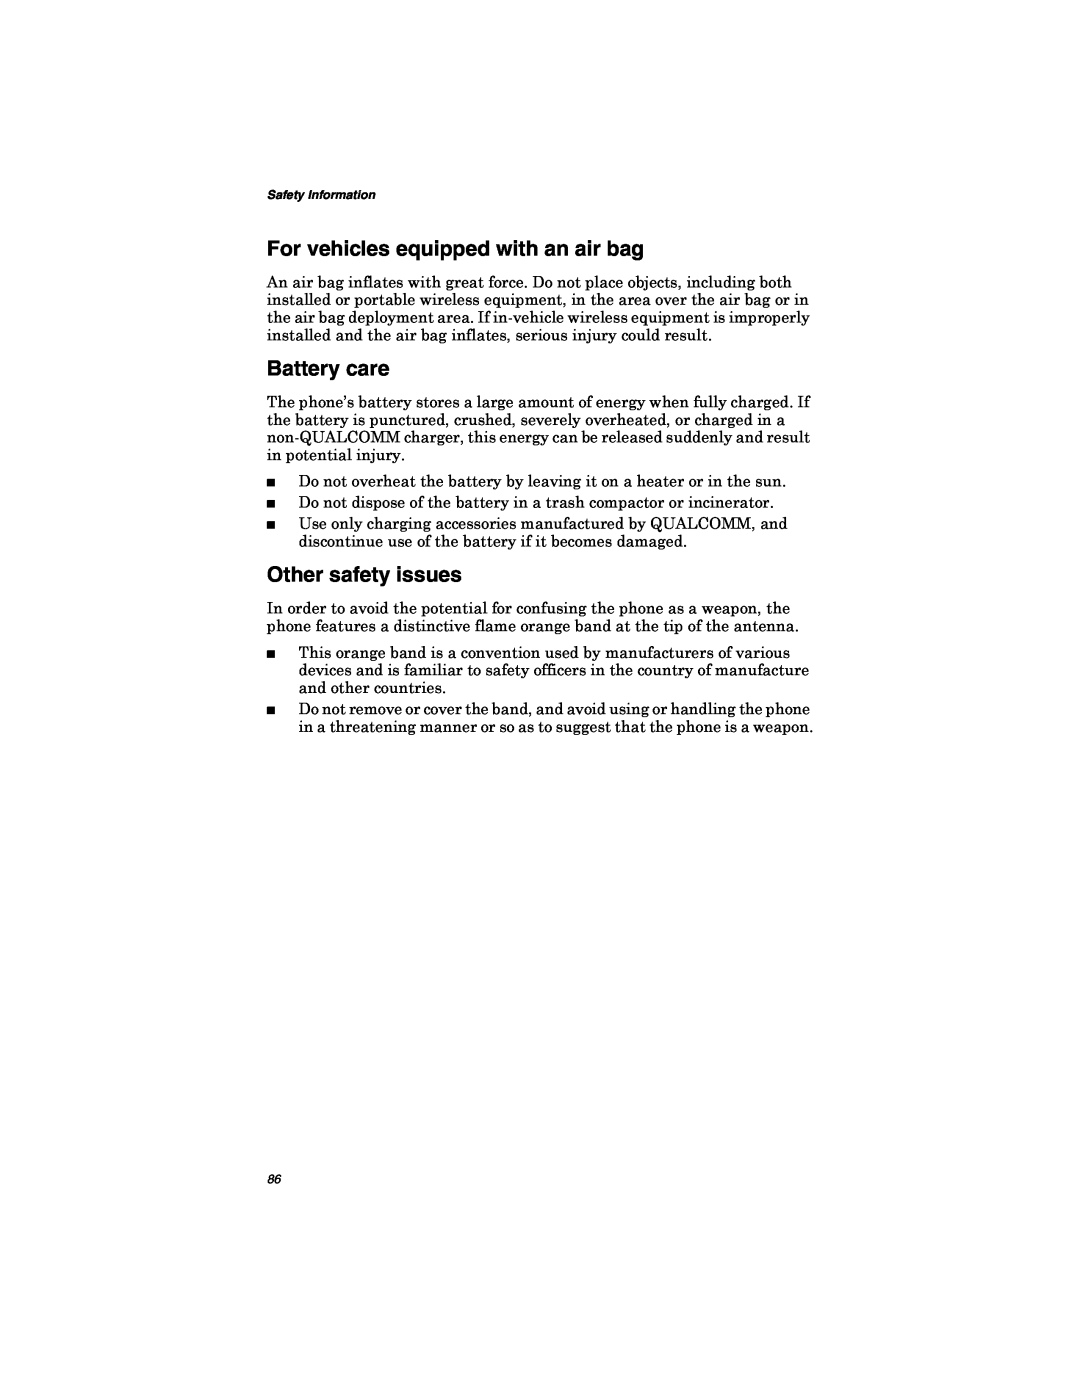 Qualcomm GSP-1600 manual For vehicles equipped with an air bag, Battery care, Other safety issues, Safety Information 